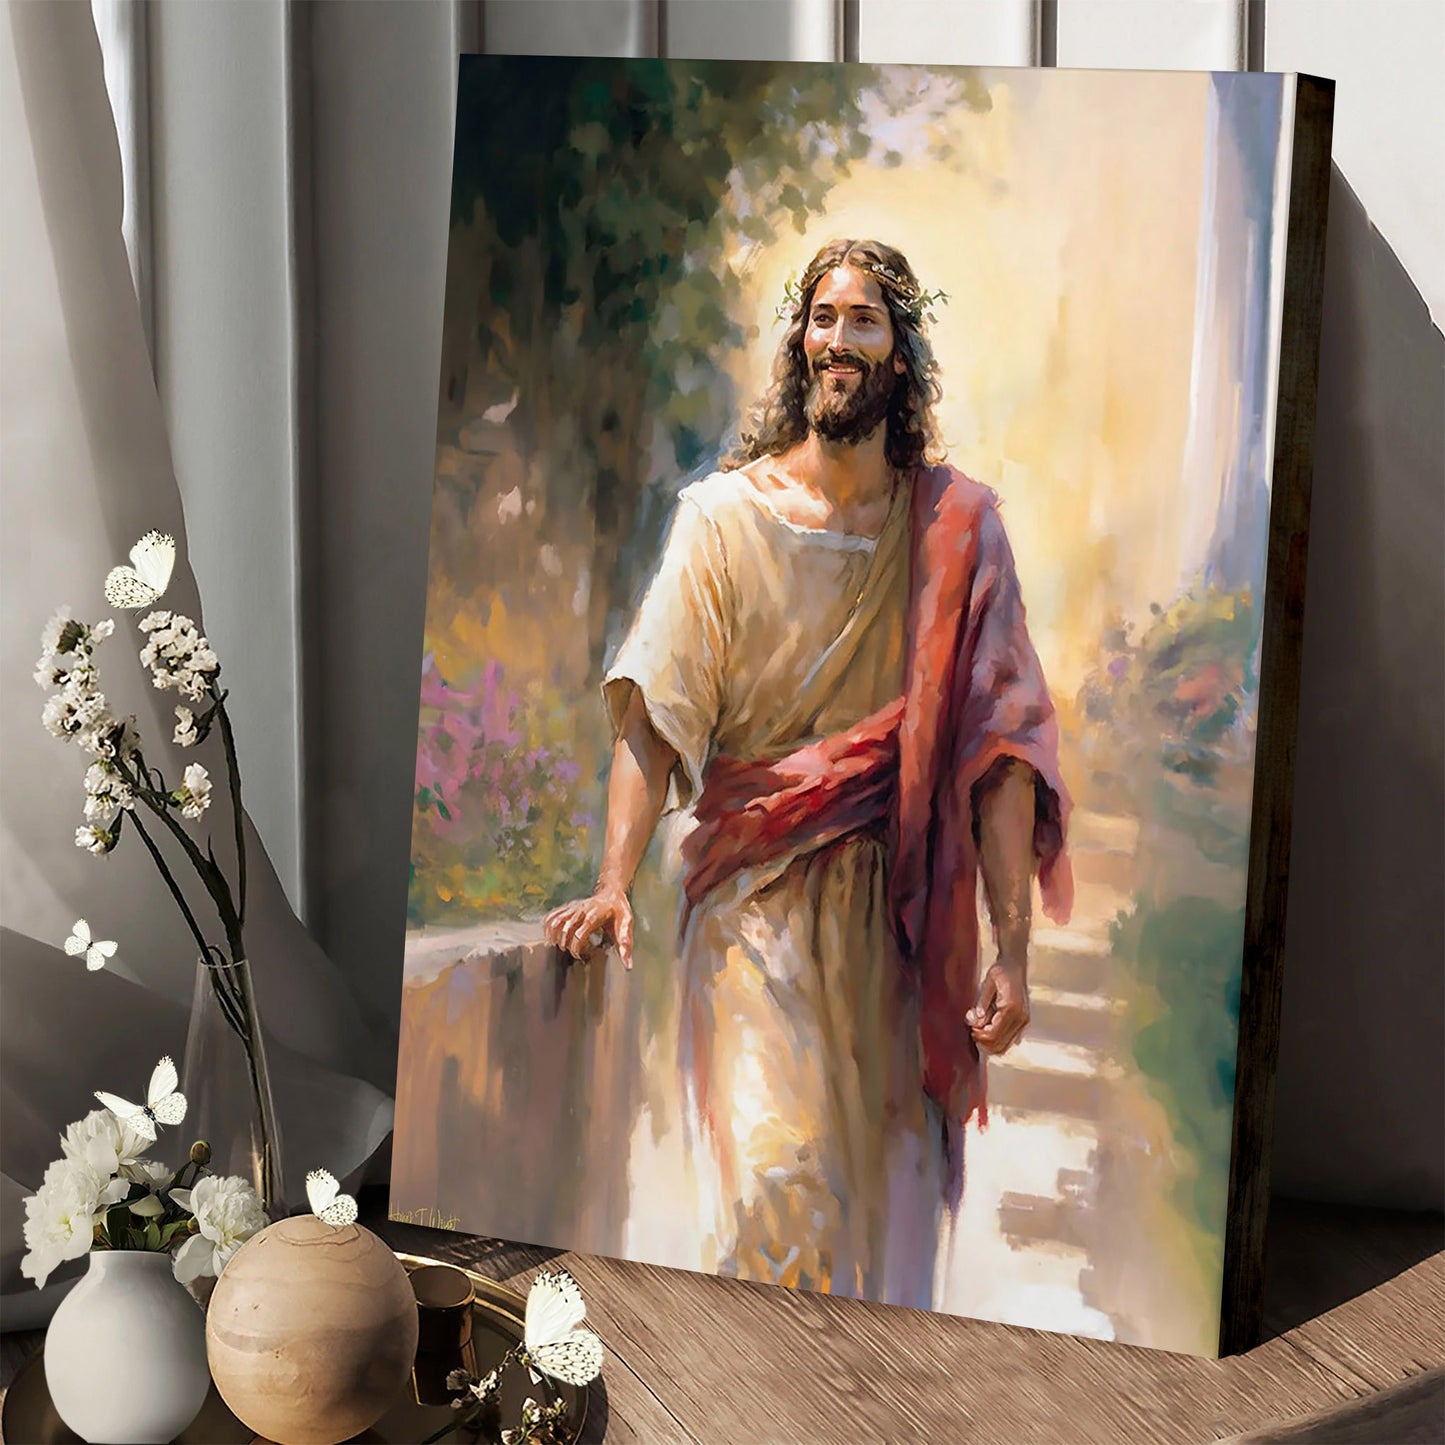 The Crown Of Thorns Transformed Christian Wall Art - Canvas Pictures - Jesus Canvas Art - Christian Wall Art